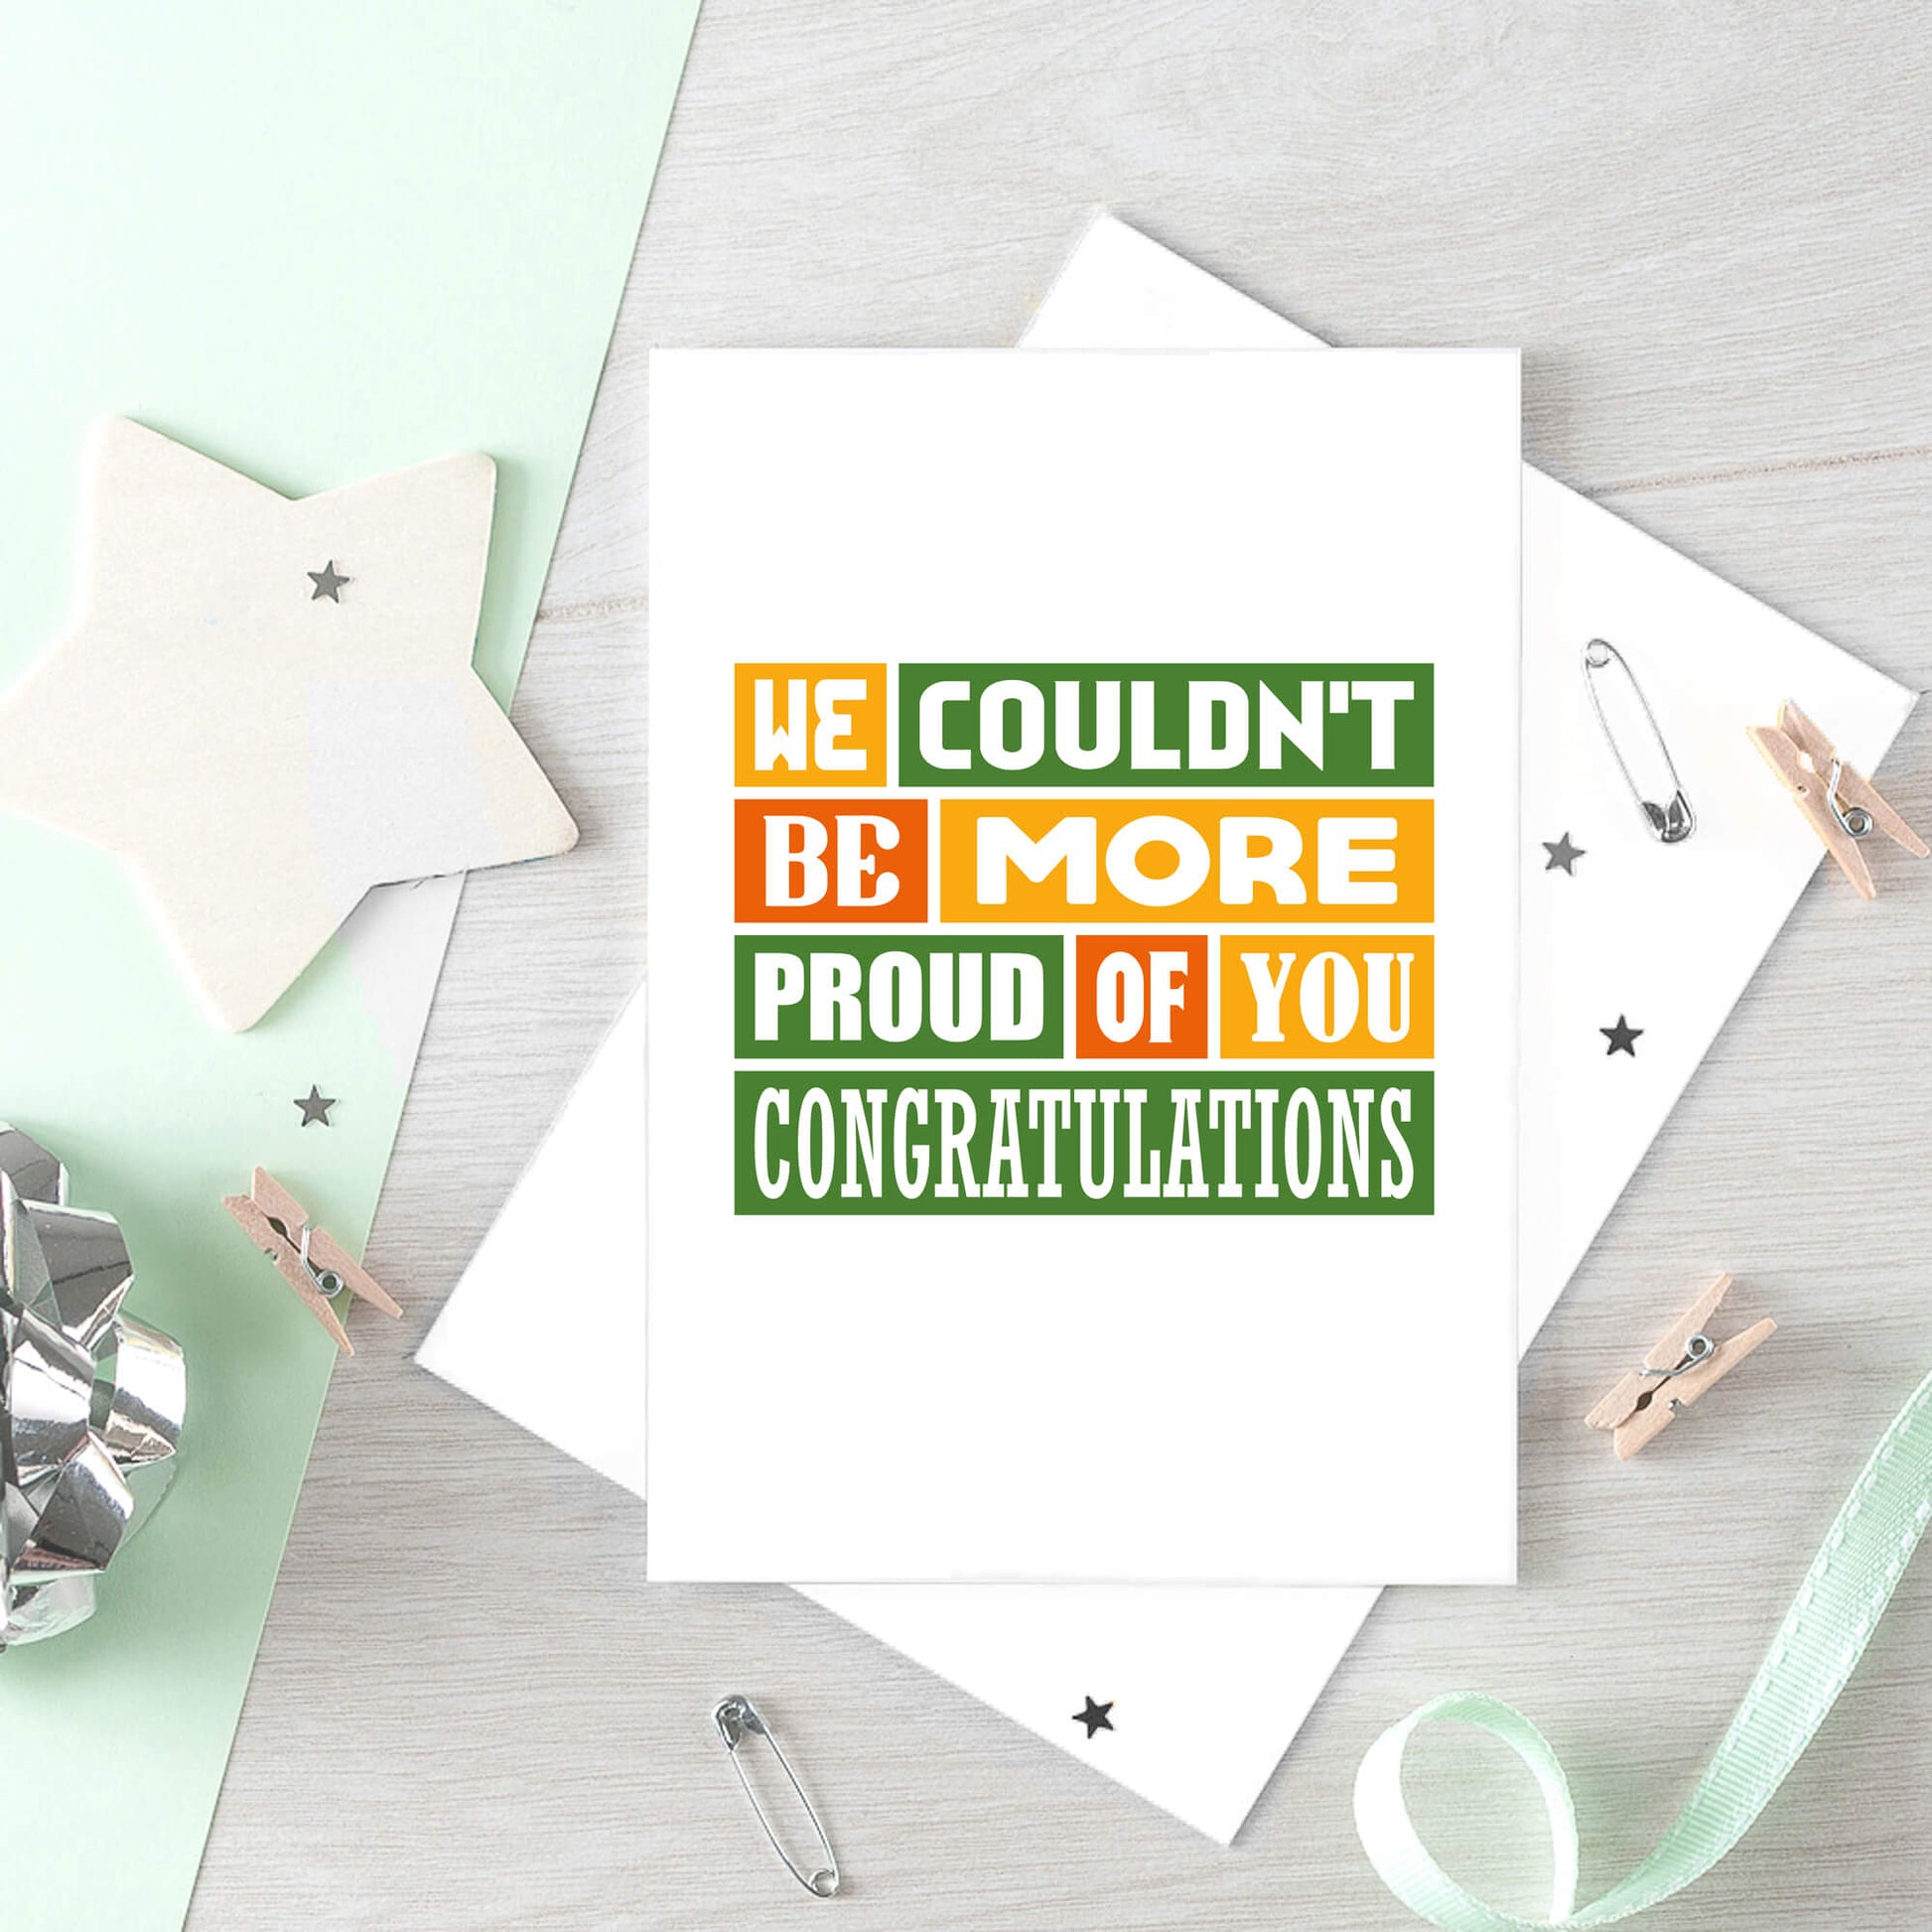 Congratulations Card by SixElevenCreations. Reads We couldn't be more proud of you. Congratulations. Product Code SE0346A5